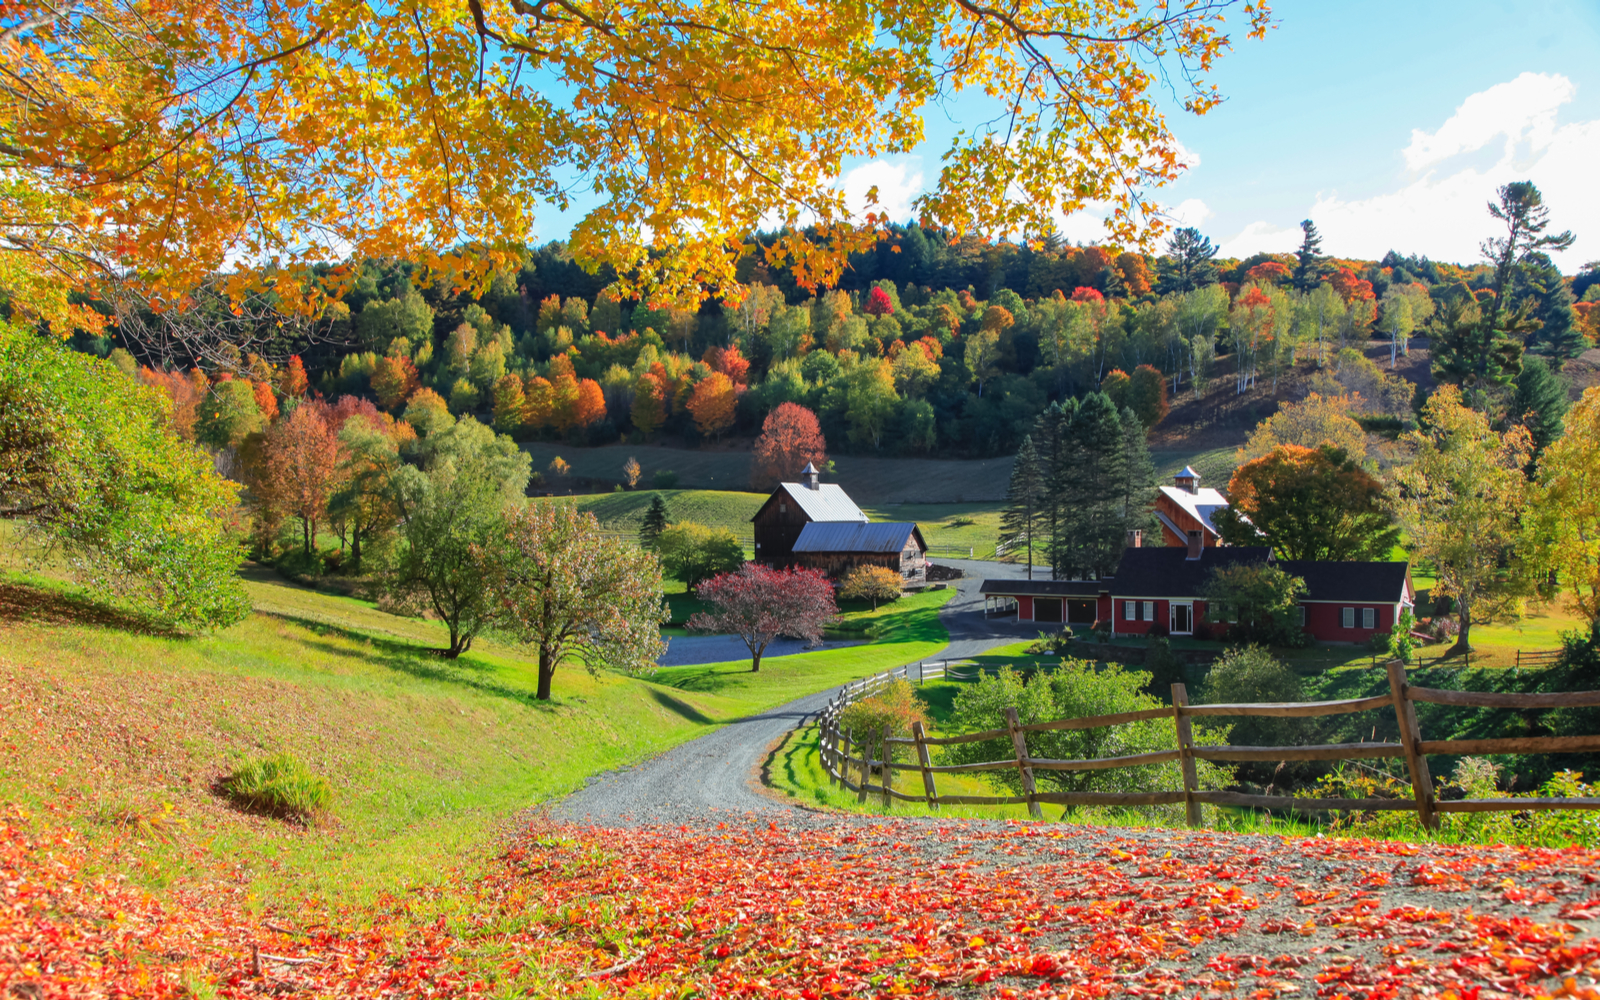 15 Best Things to Do in Vermont in 2023